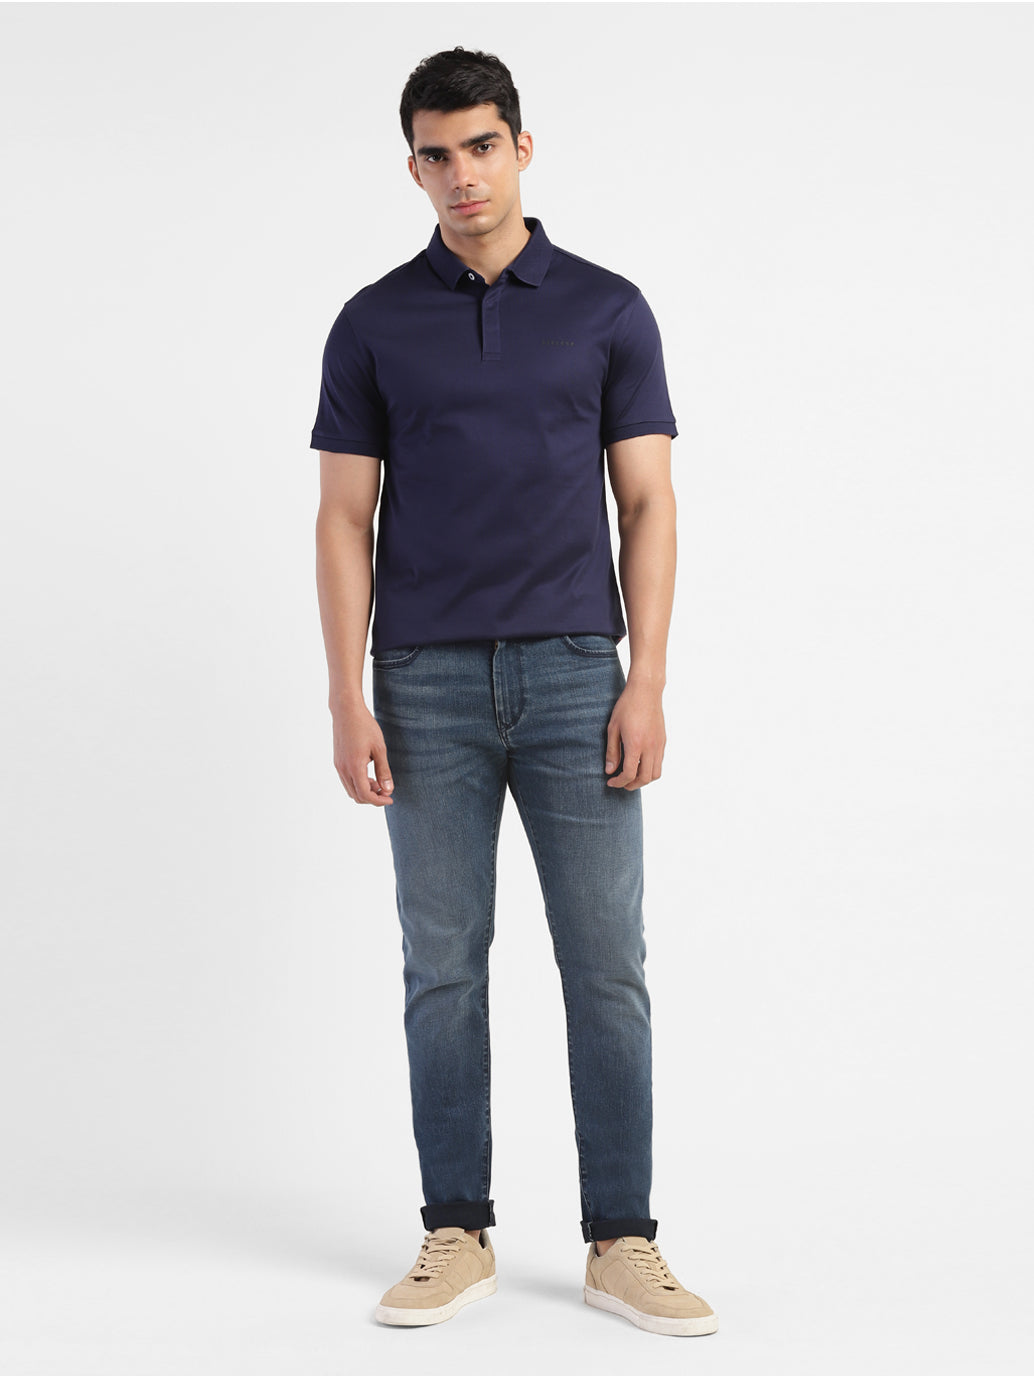 Men's 512 Slim Tapered Fit Jeans – Levis India Store